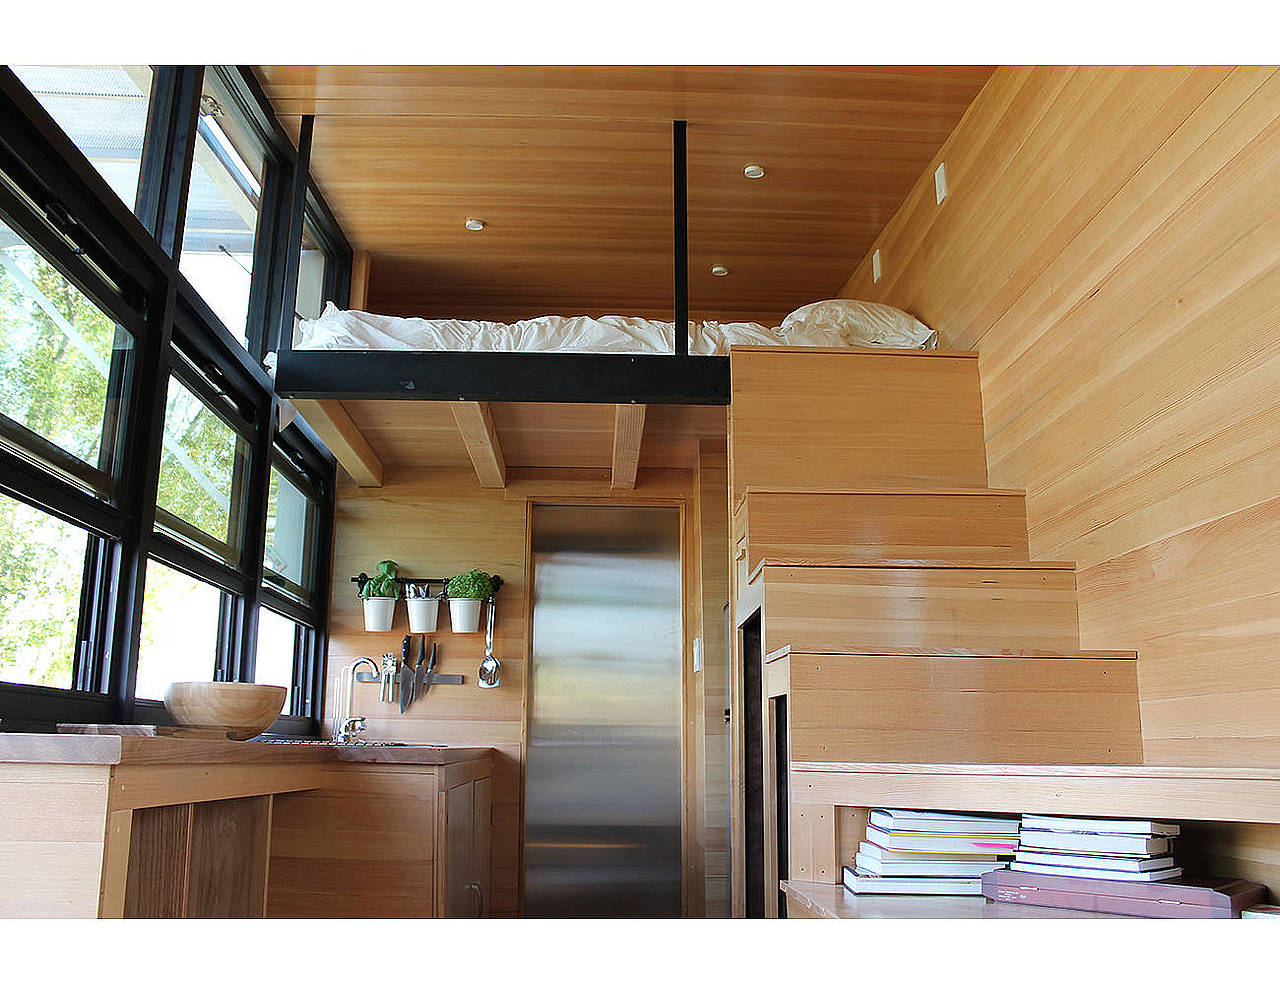  Architects  find big satisfaction in tiny  house  NDSU News 